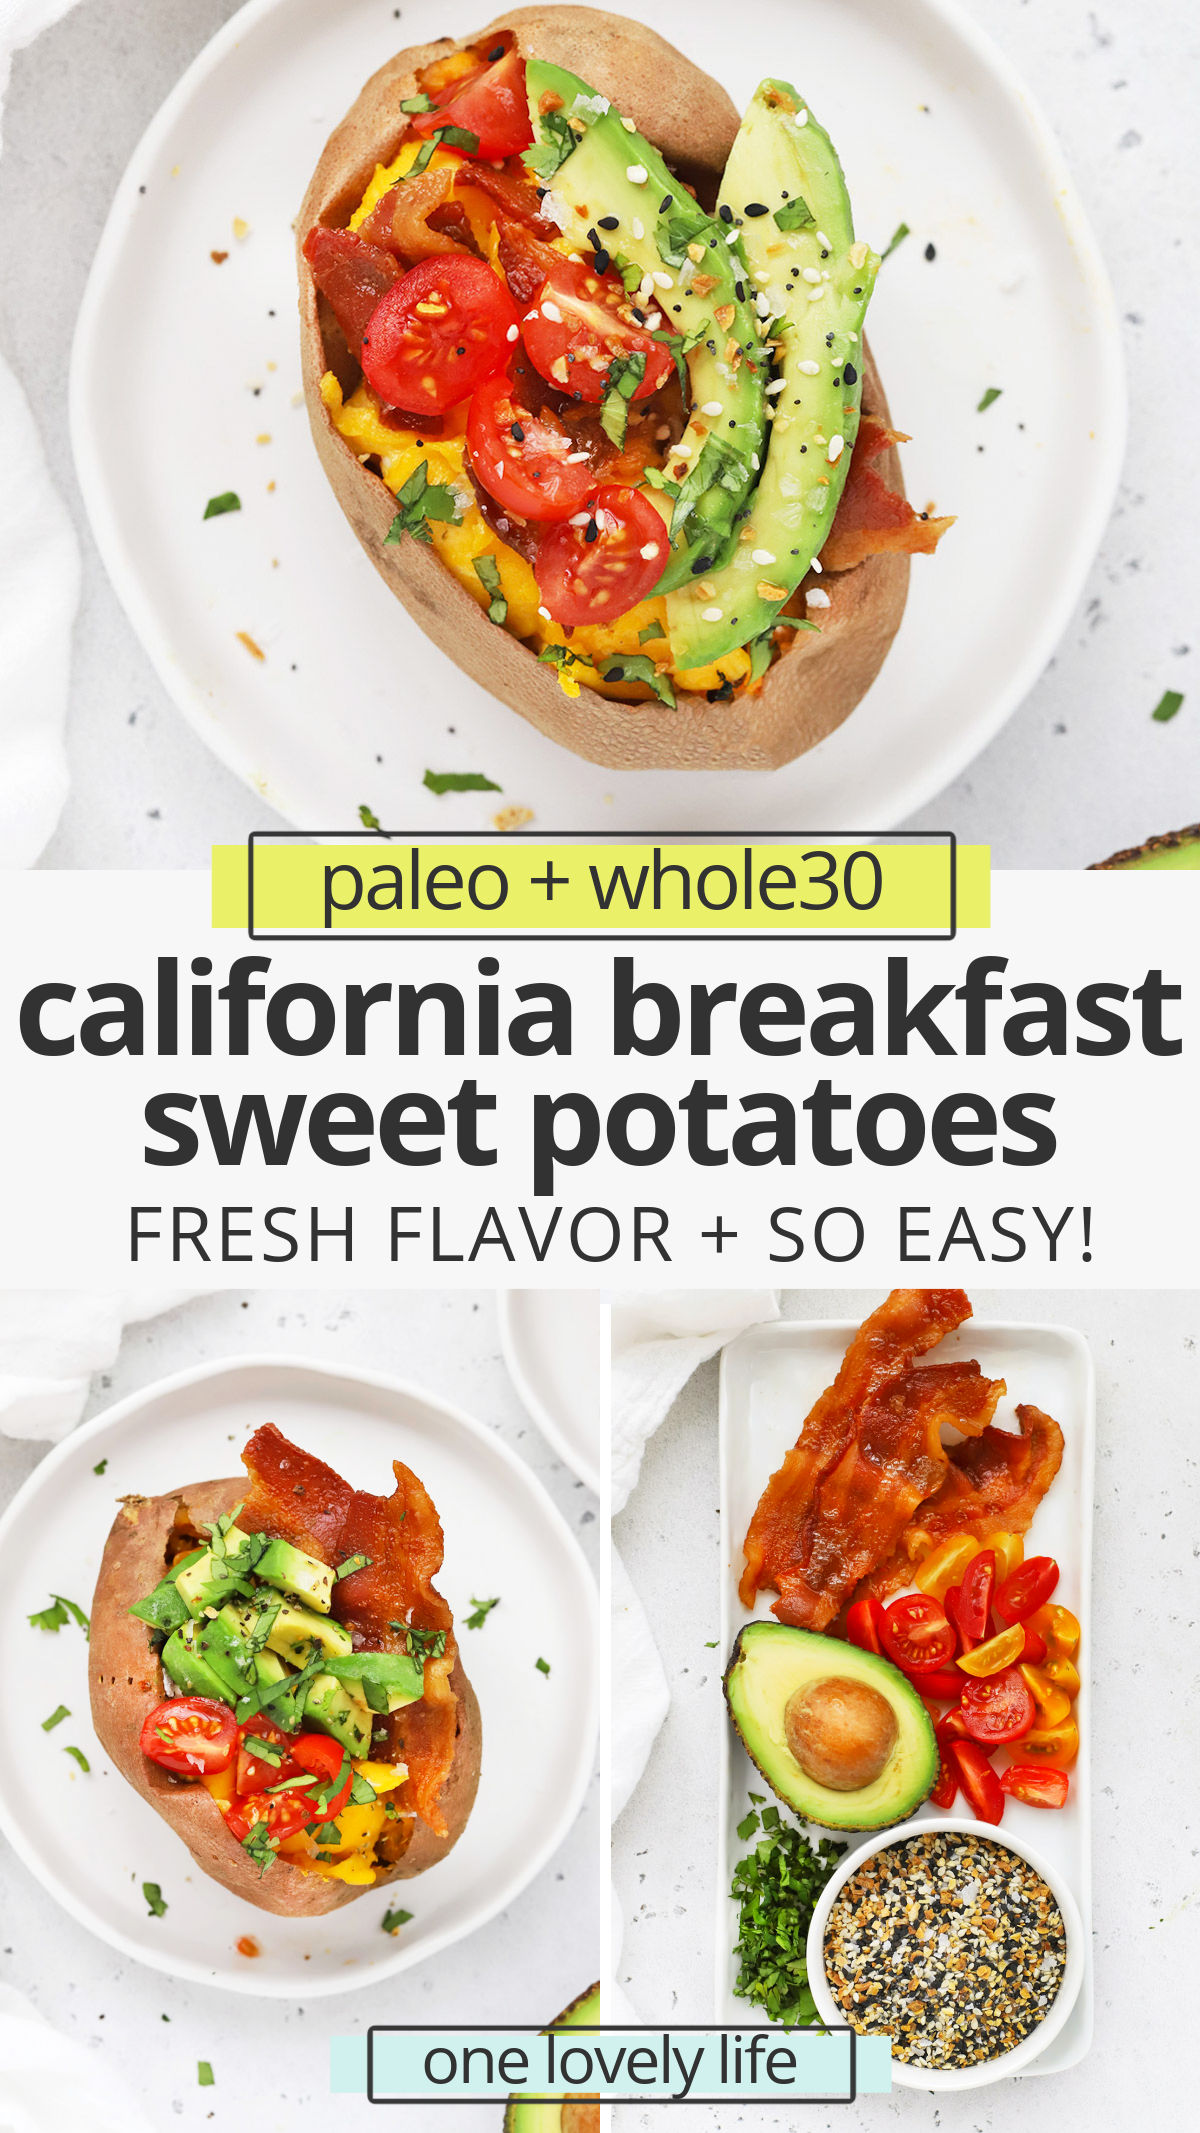 California Breakfast Stuffed Sweet Potatoes - This savory breakfast is loaded with goodies for a delicious start to the day! (Paleo, Whole30) // Whole30 breakfast // paleo breakfast // healthy breakfast // breakfast stuffed sweet potato recipe // gluten-free // stuffed sweet potatoes #breakfast #paleo #whole30 #healthy